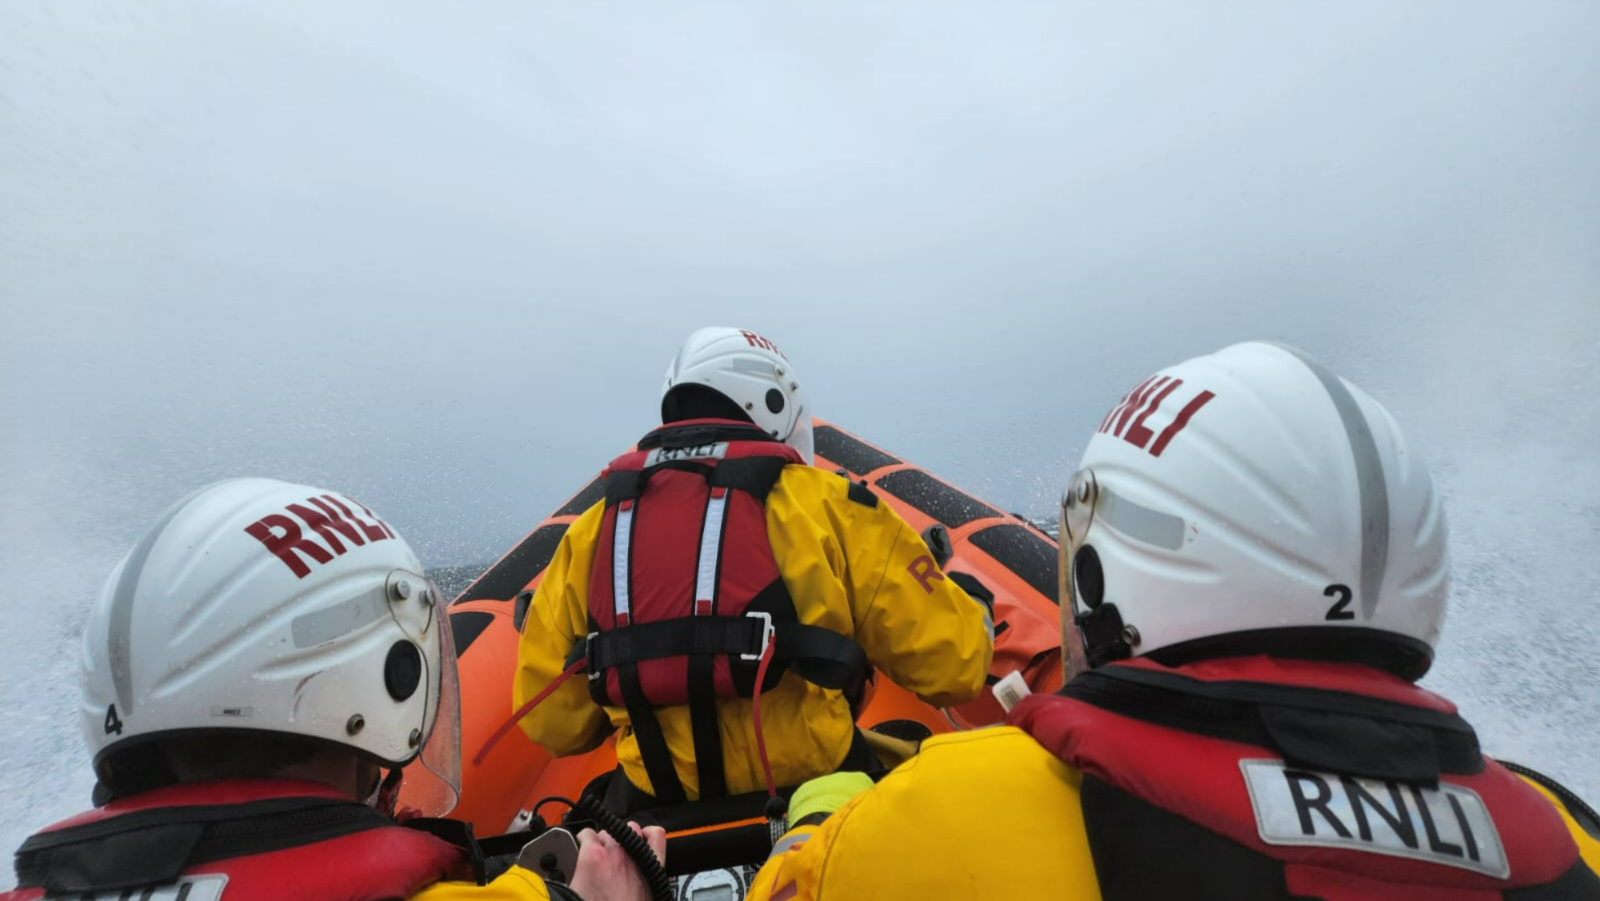 Images from Kyle RNLI